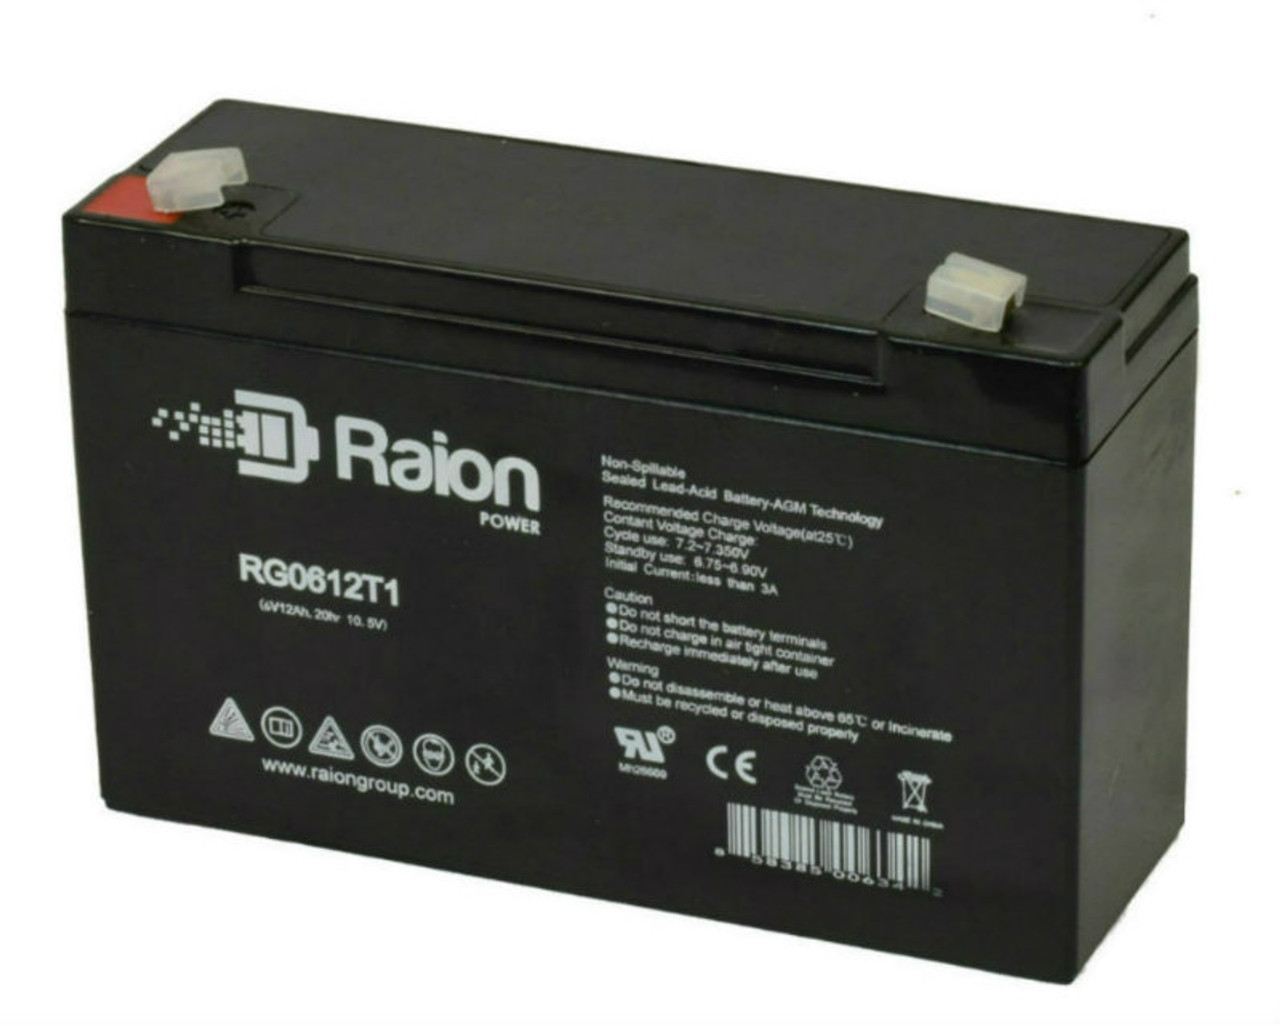 Raion Power RG06120T1 Replacement Battery for XNB SN06010